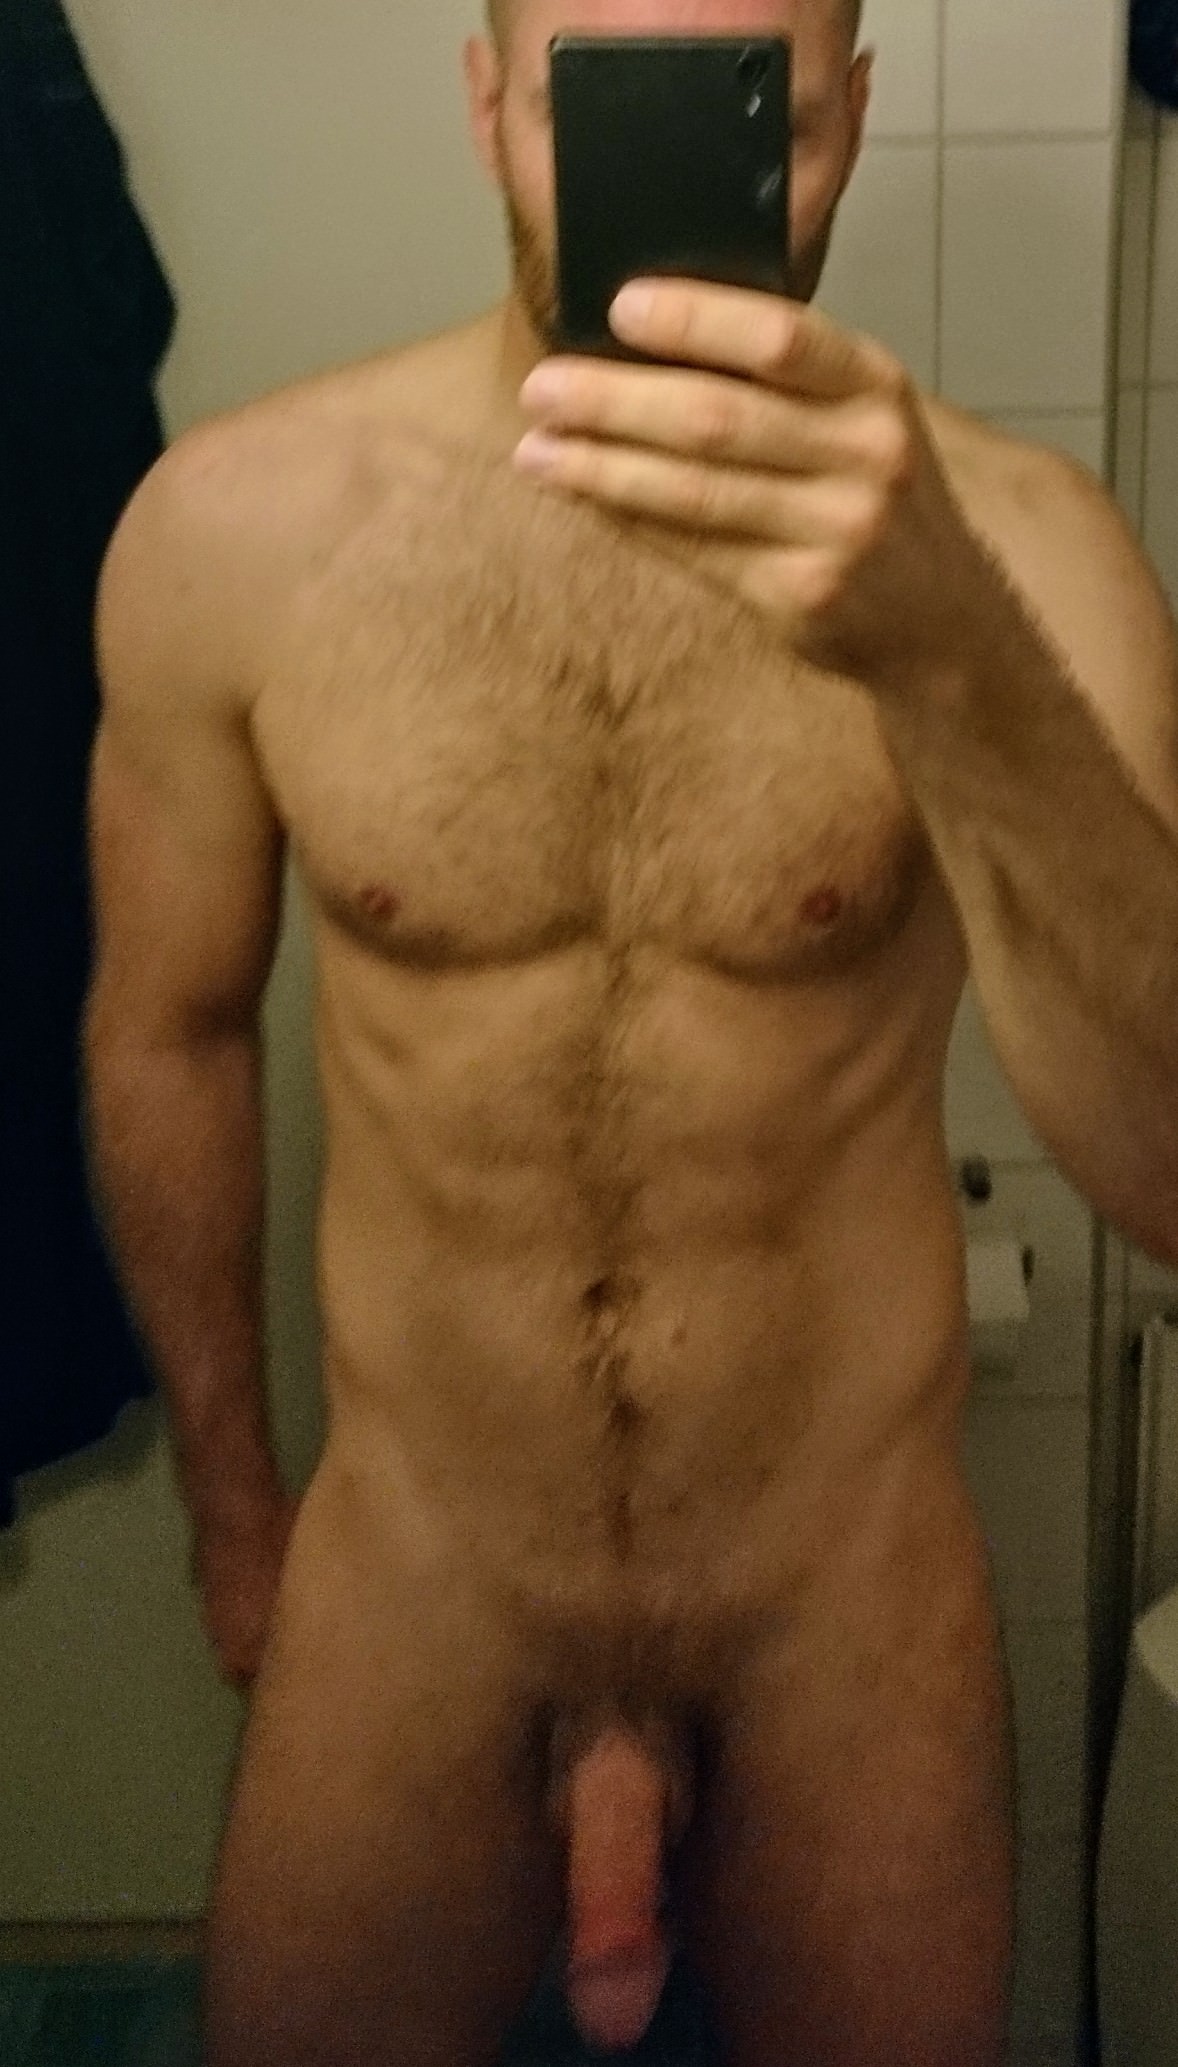 [40] Another day, another dad gone wild | Daddy/Mature  Porr | Hot XXX Gays